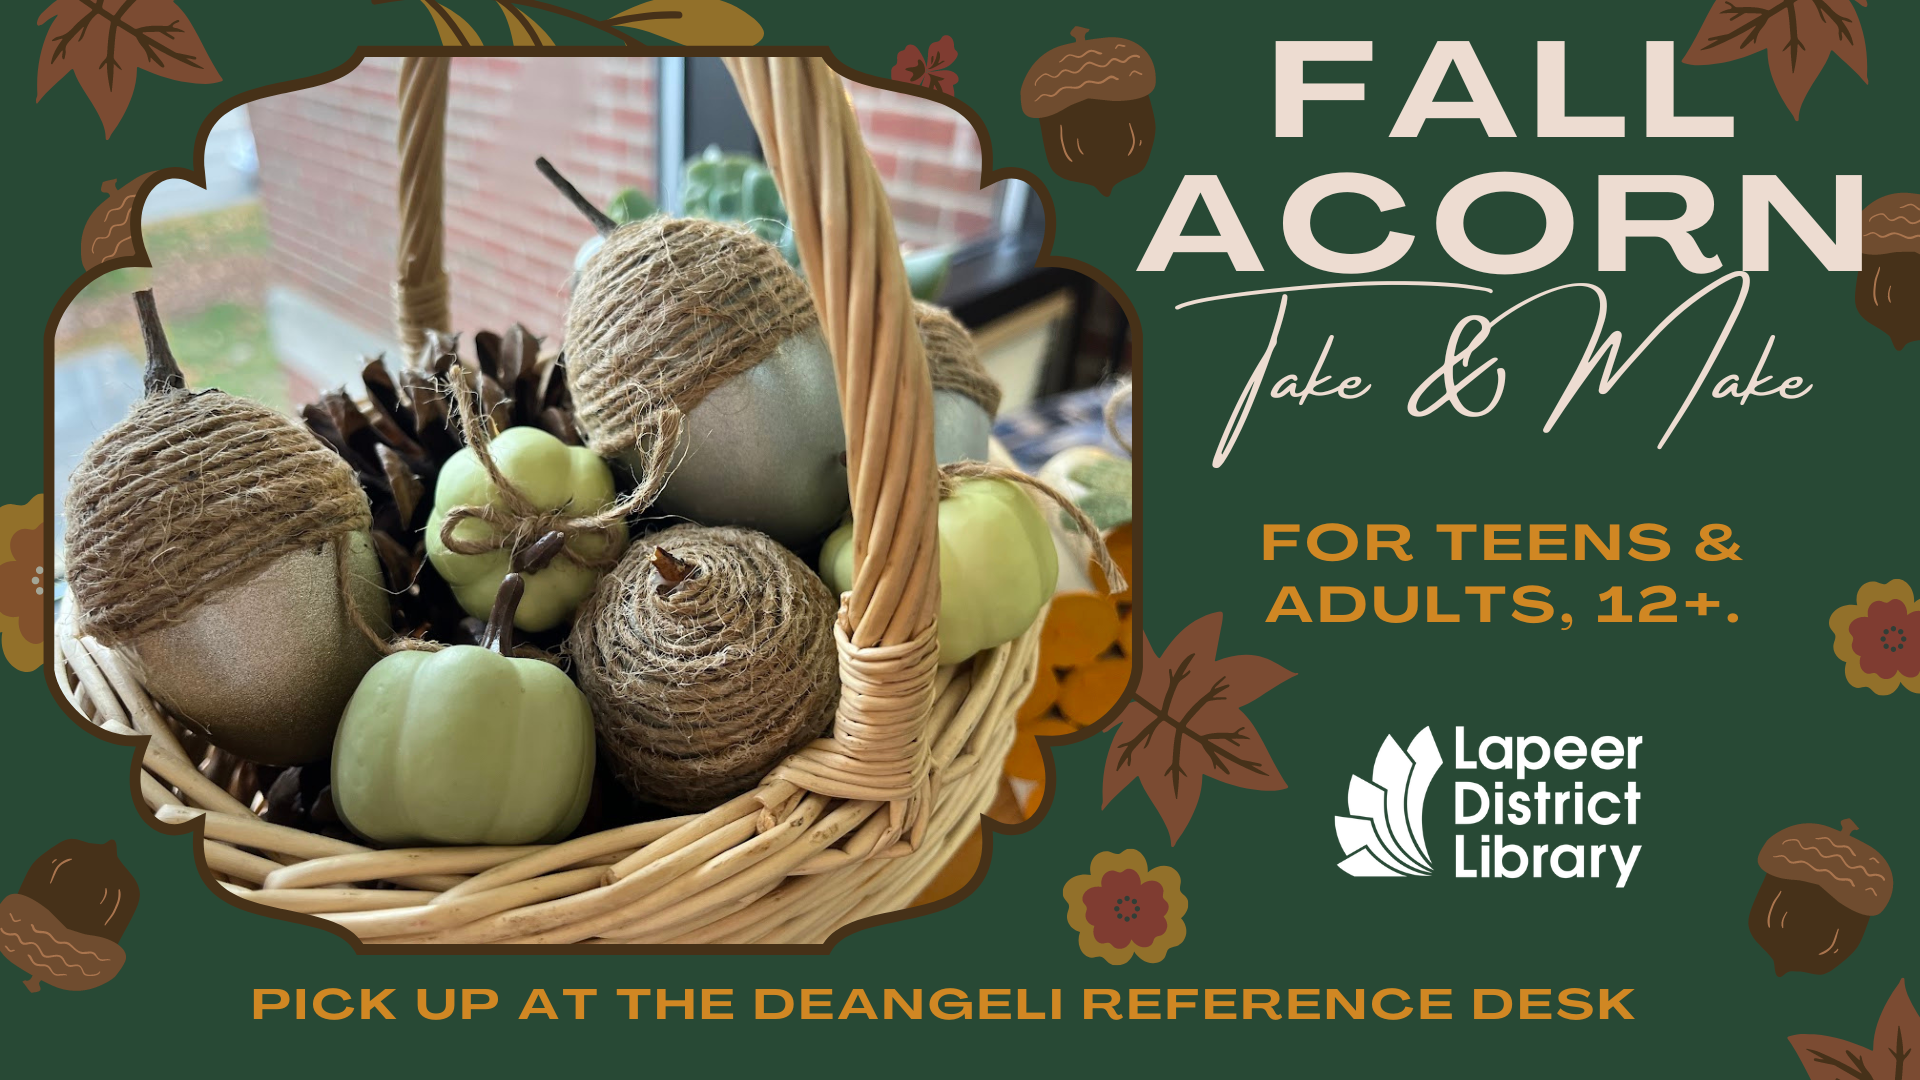 Fall Acorn Take & Make for teens & adults, 12+. pick up at the deAngeli Reference Desk